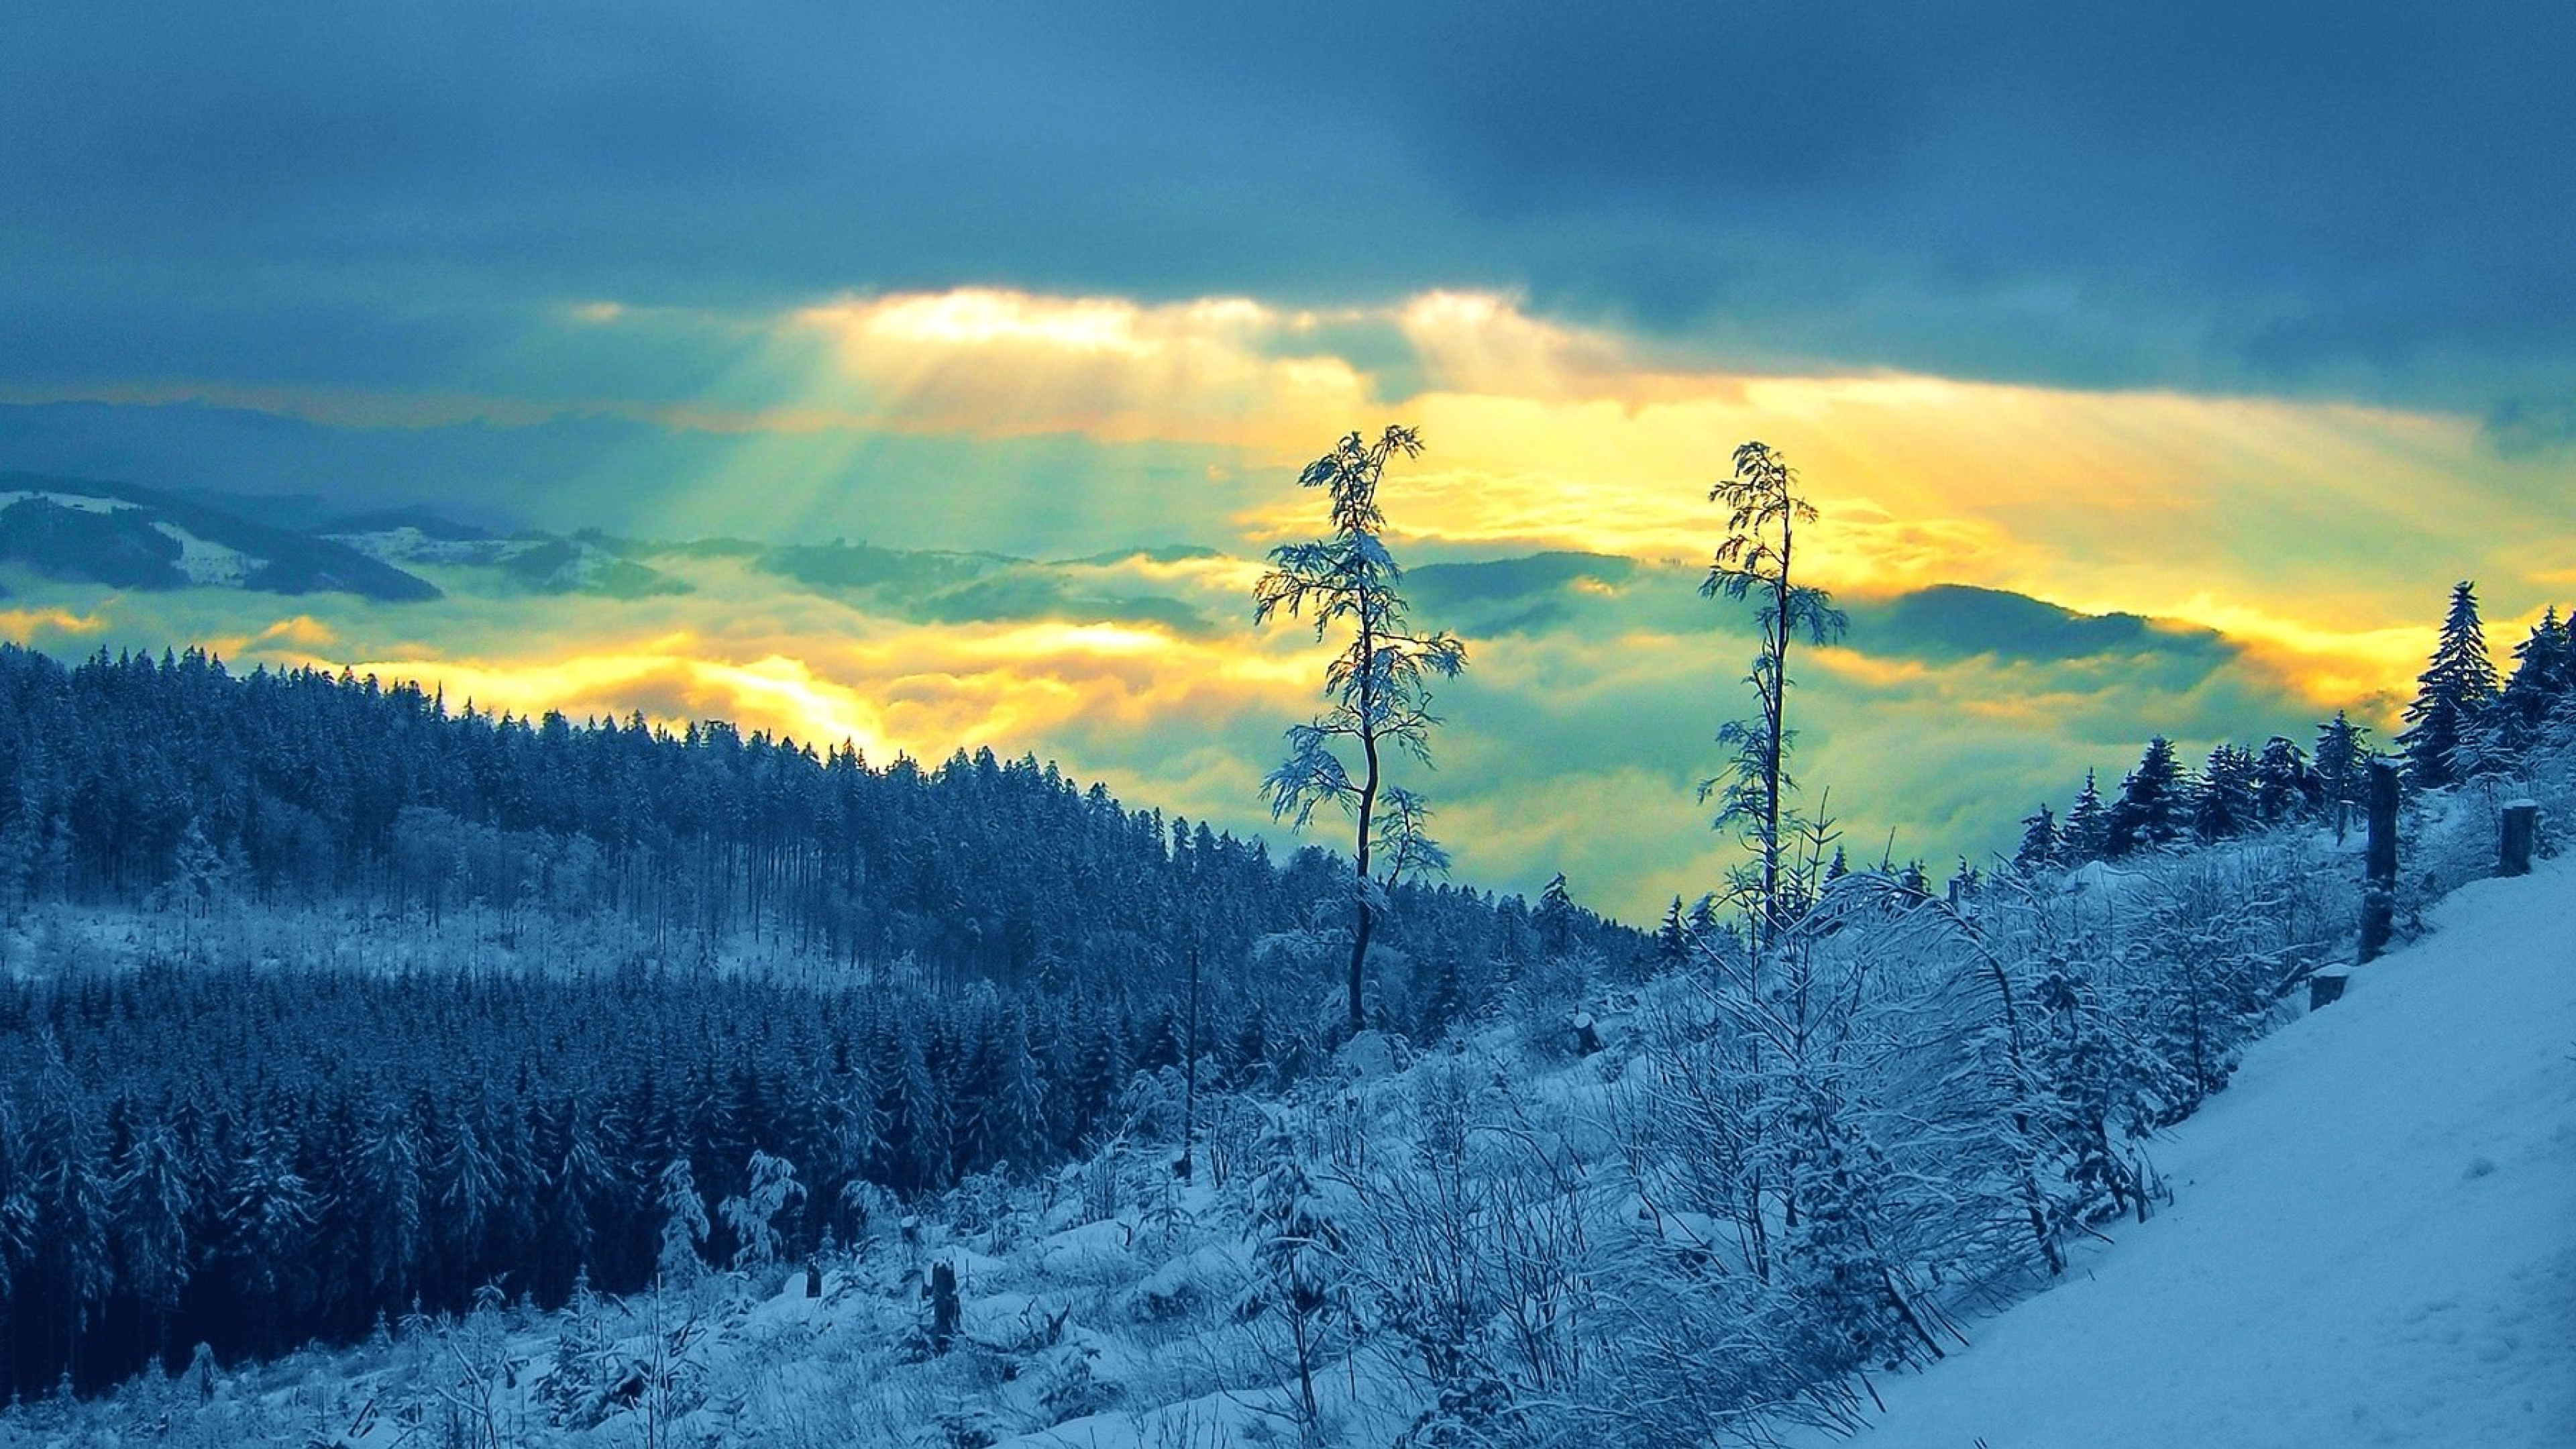 Snow Covered Trees Under Cloudy Sky During Daytime. Wallpaper in 3840x2160 Resolution